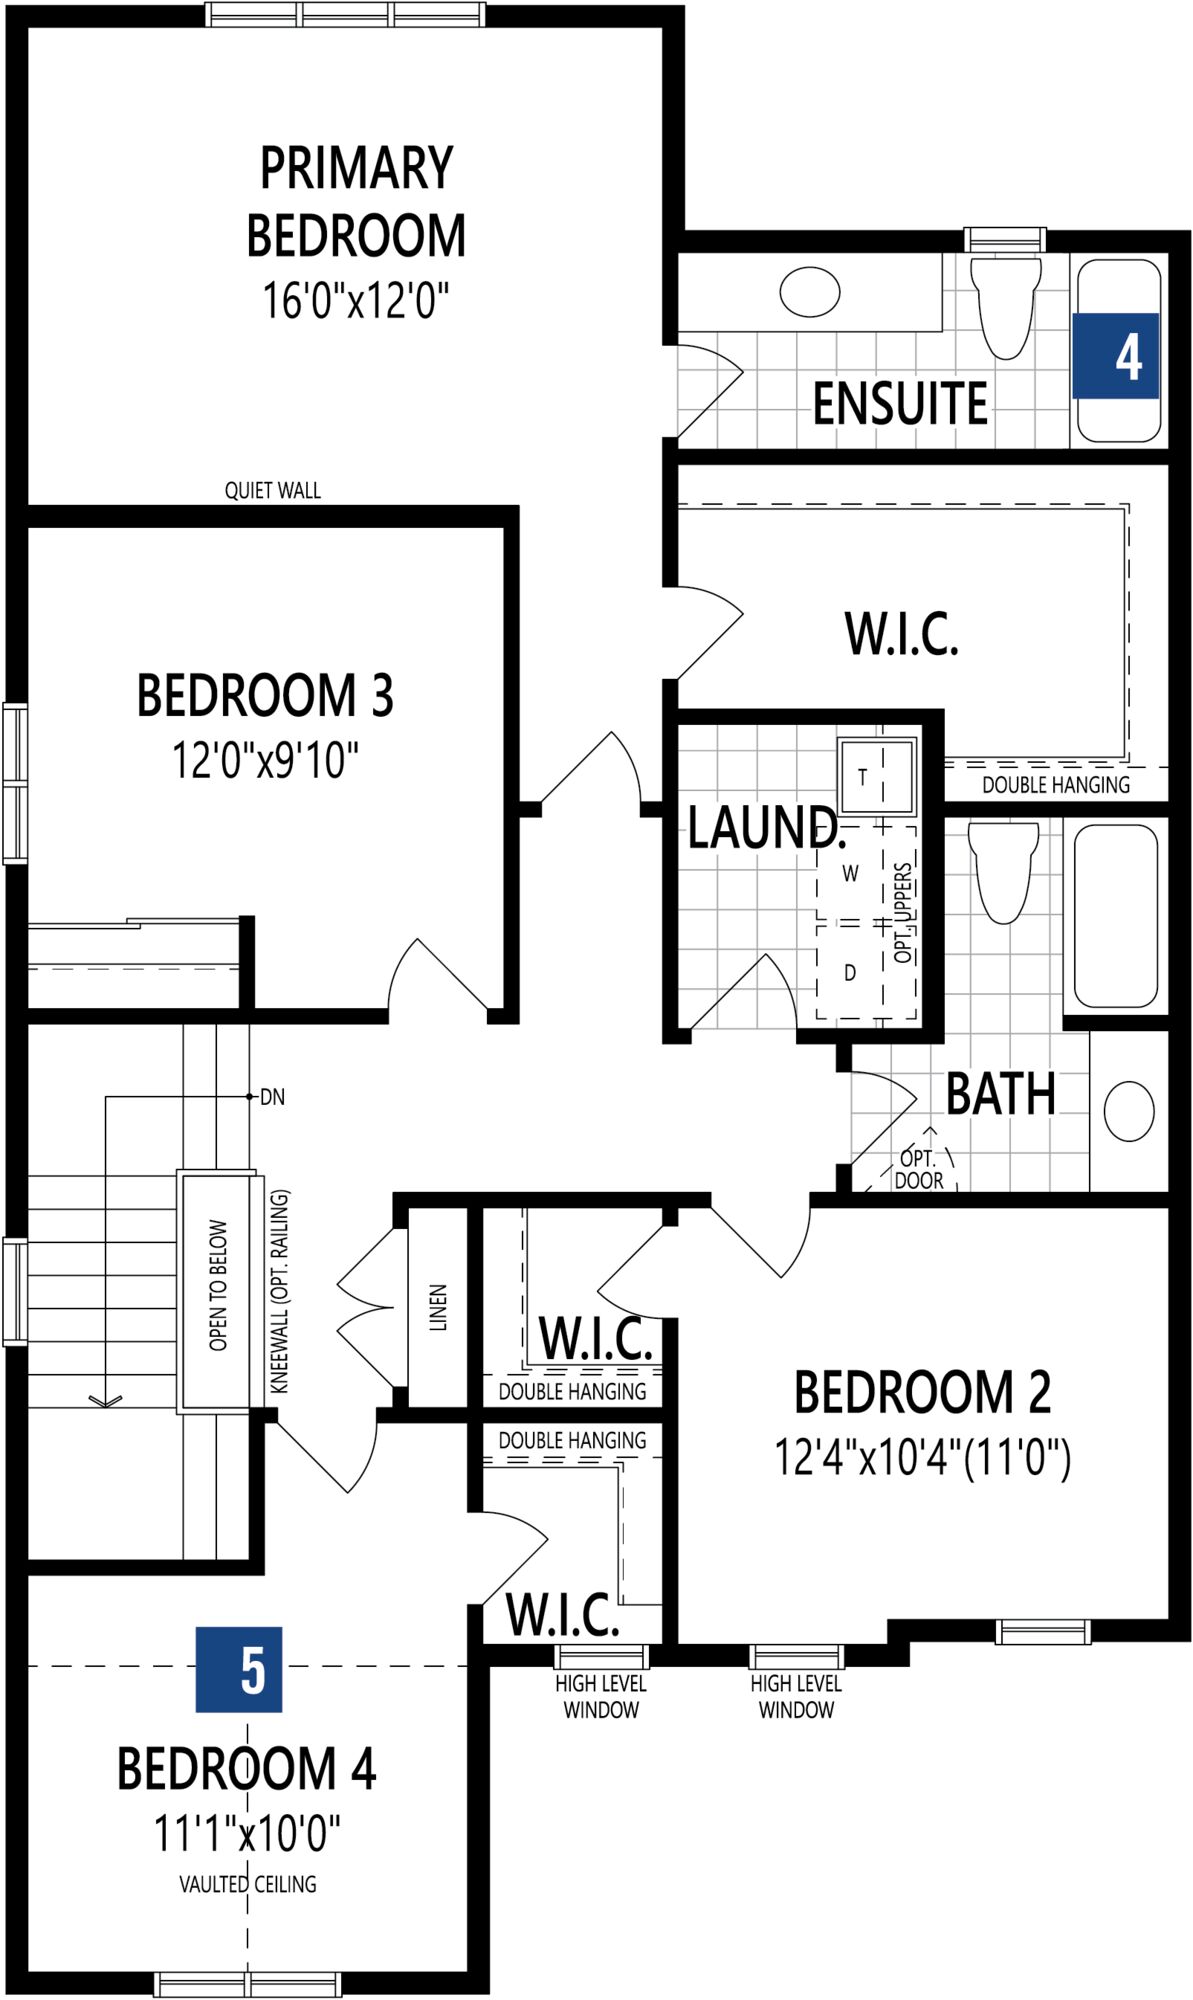 Sycamore Floor Plan of Half Moon Bay Towns with undefined beds